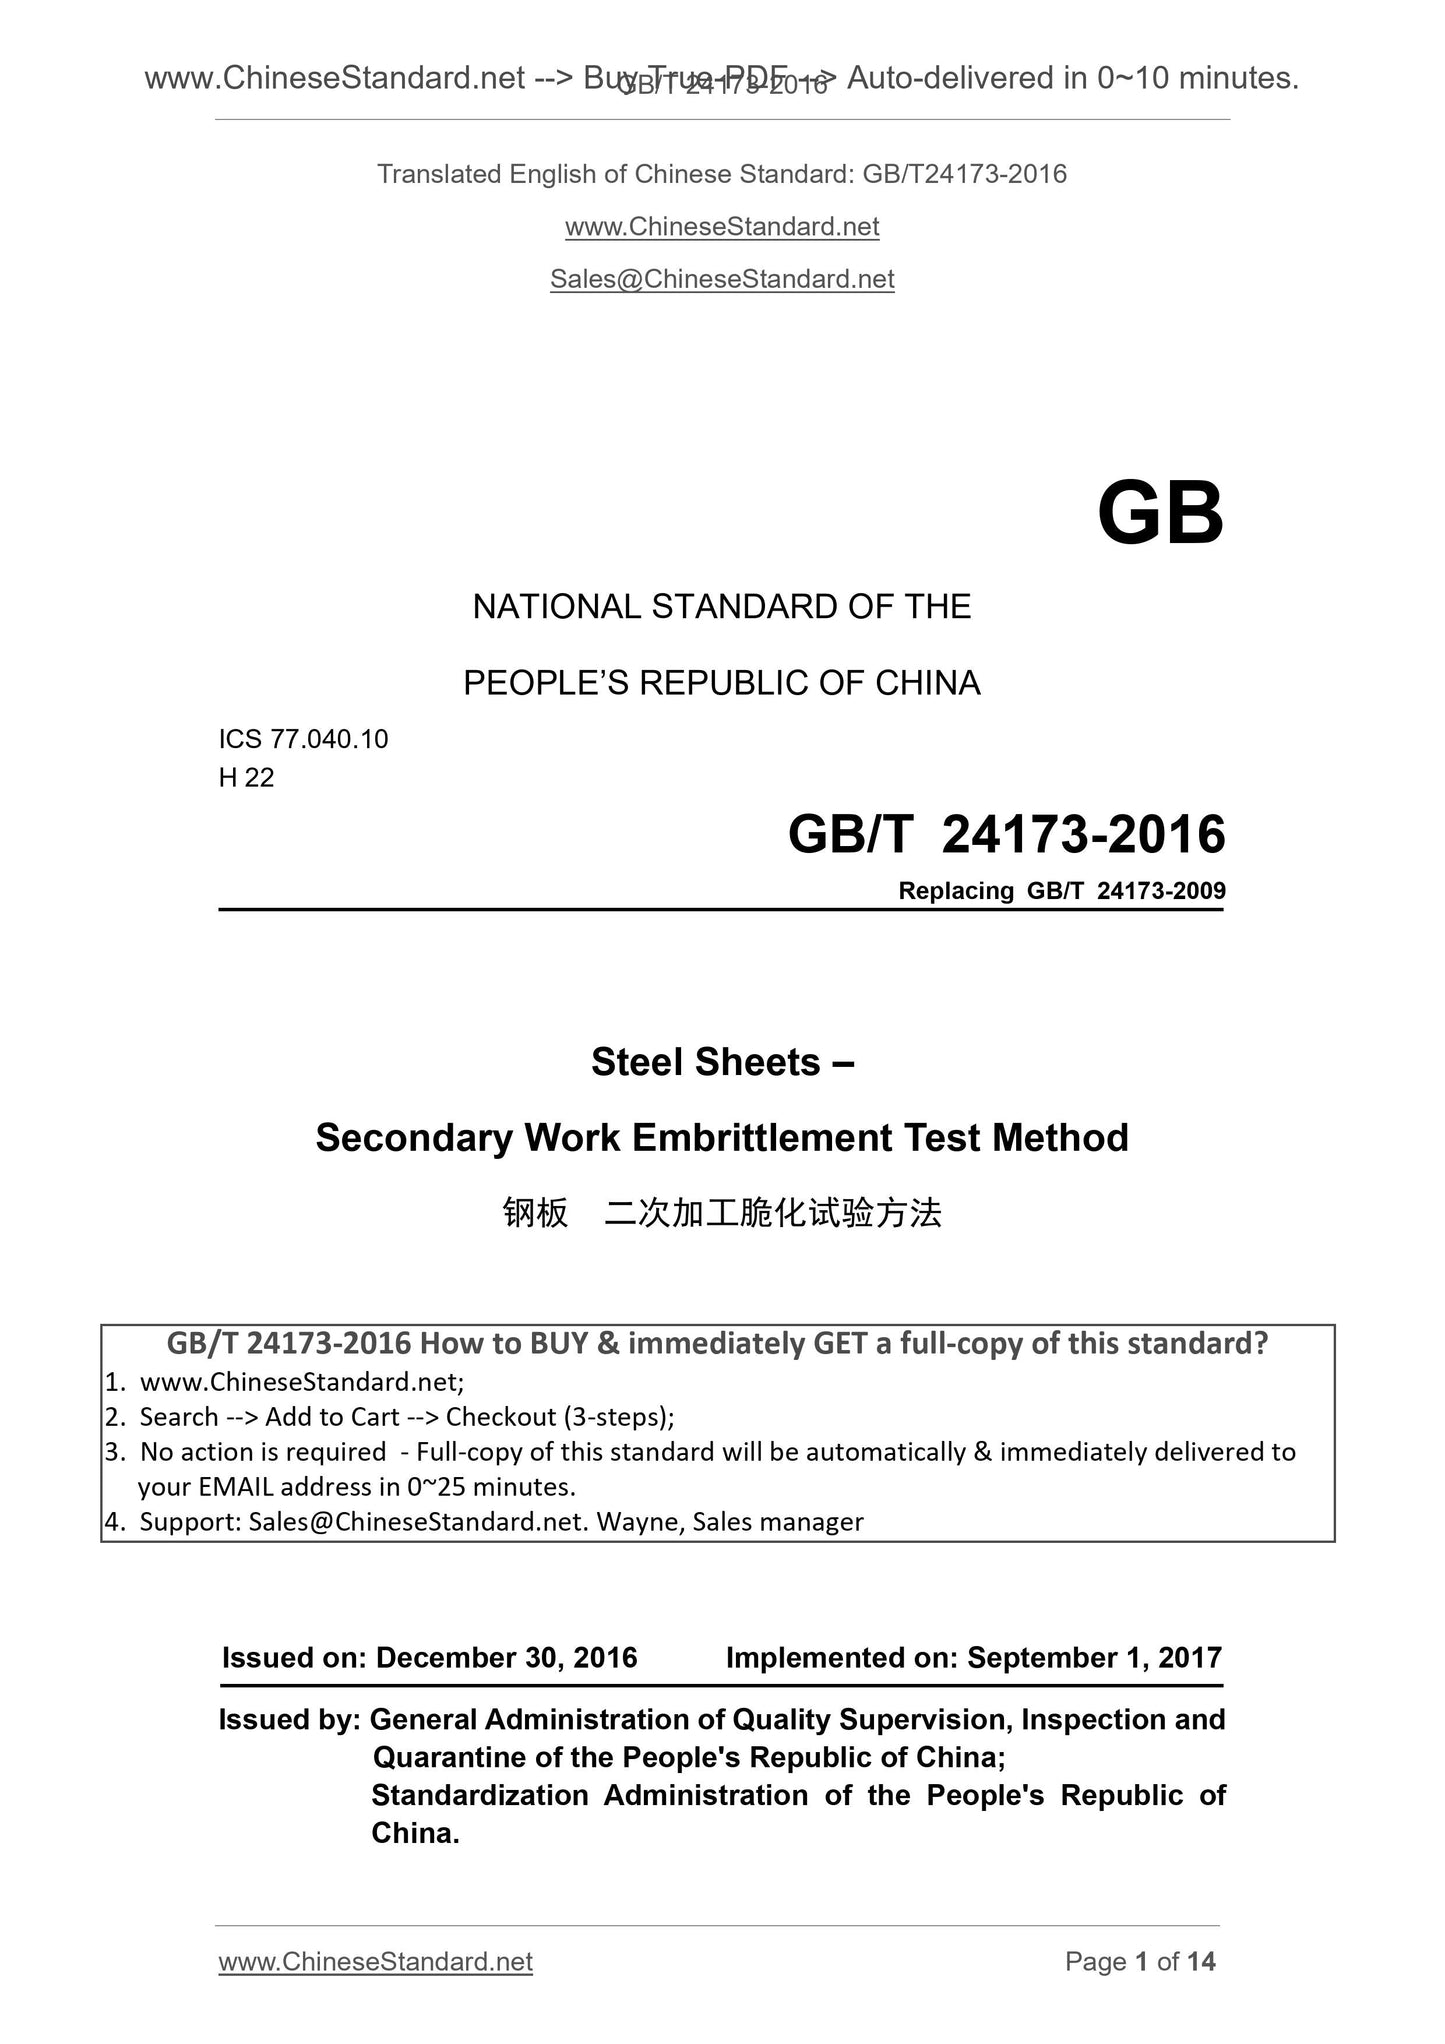 GB/T 24173-2016 Page 1